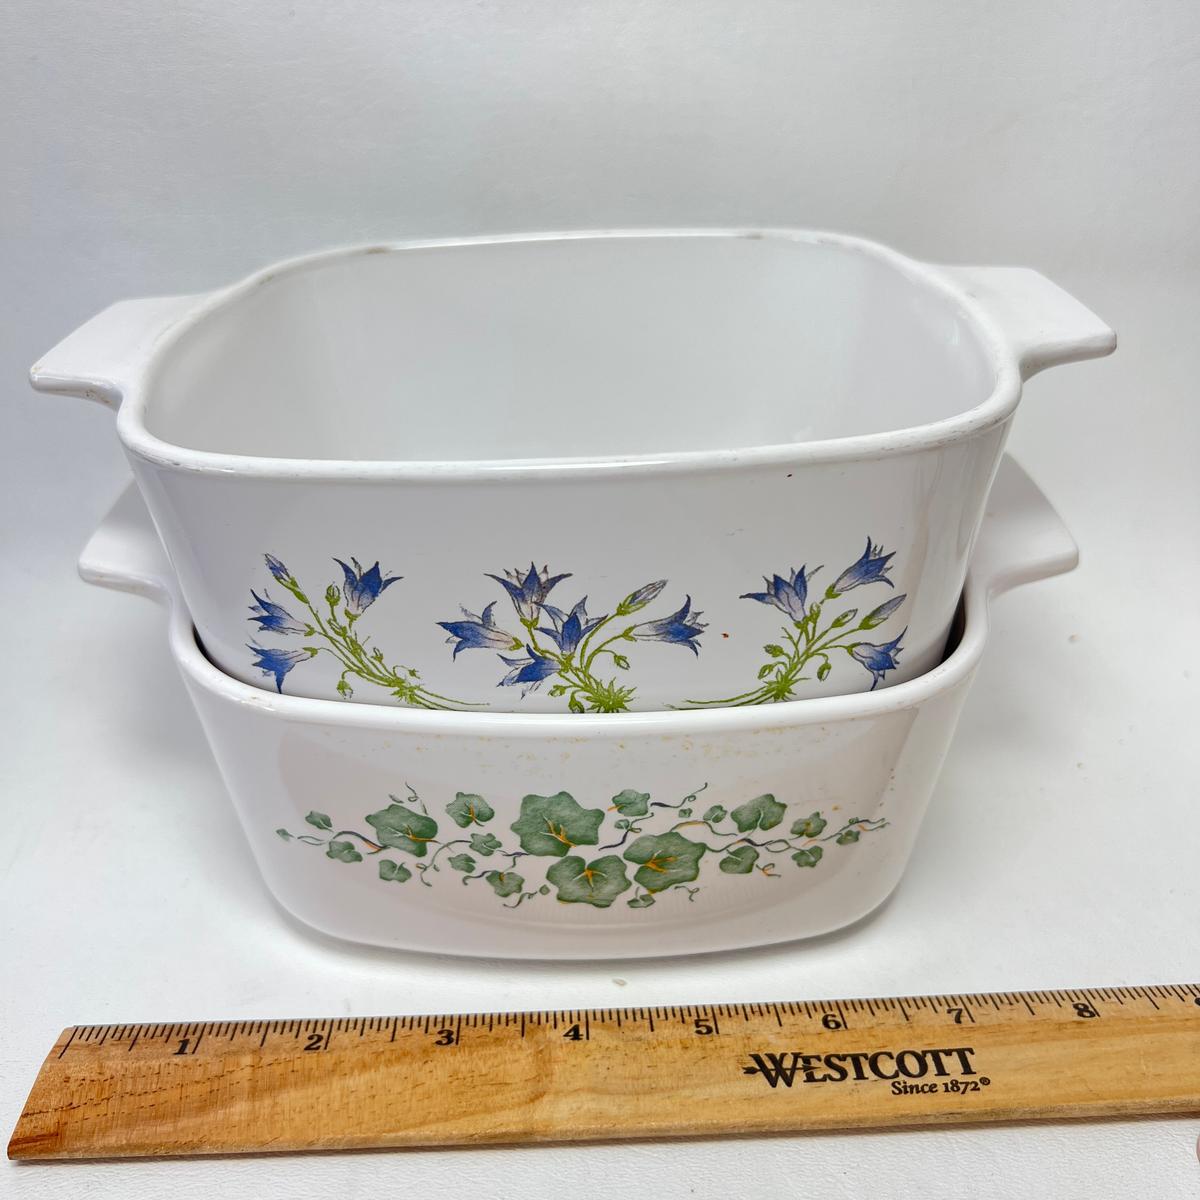 Pair of Corning Ware 1.5 Liter Casserole Dishes